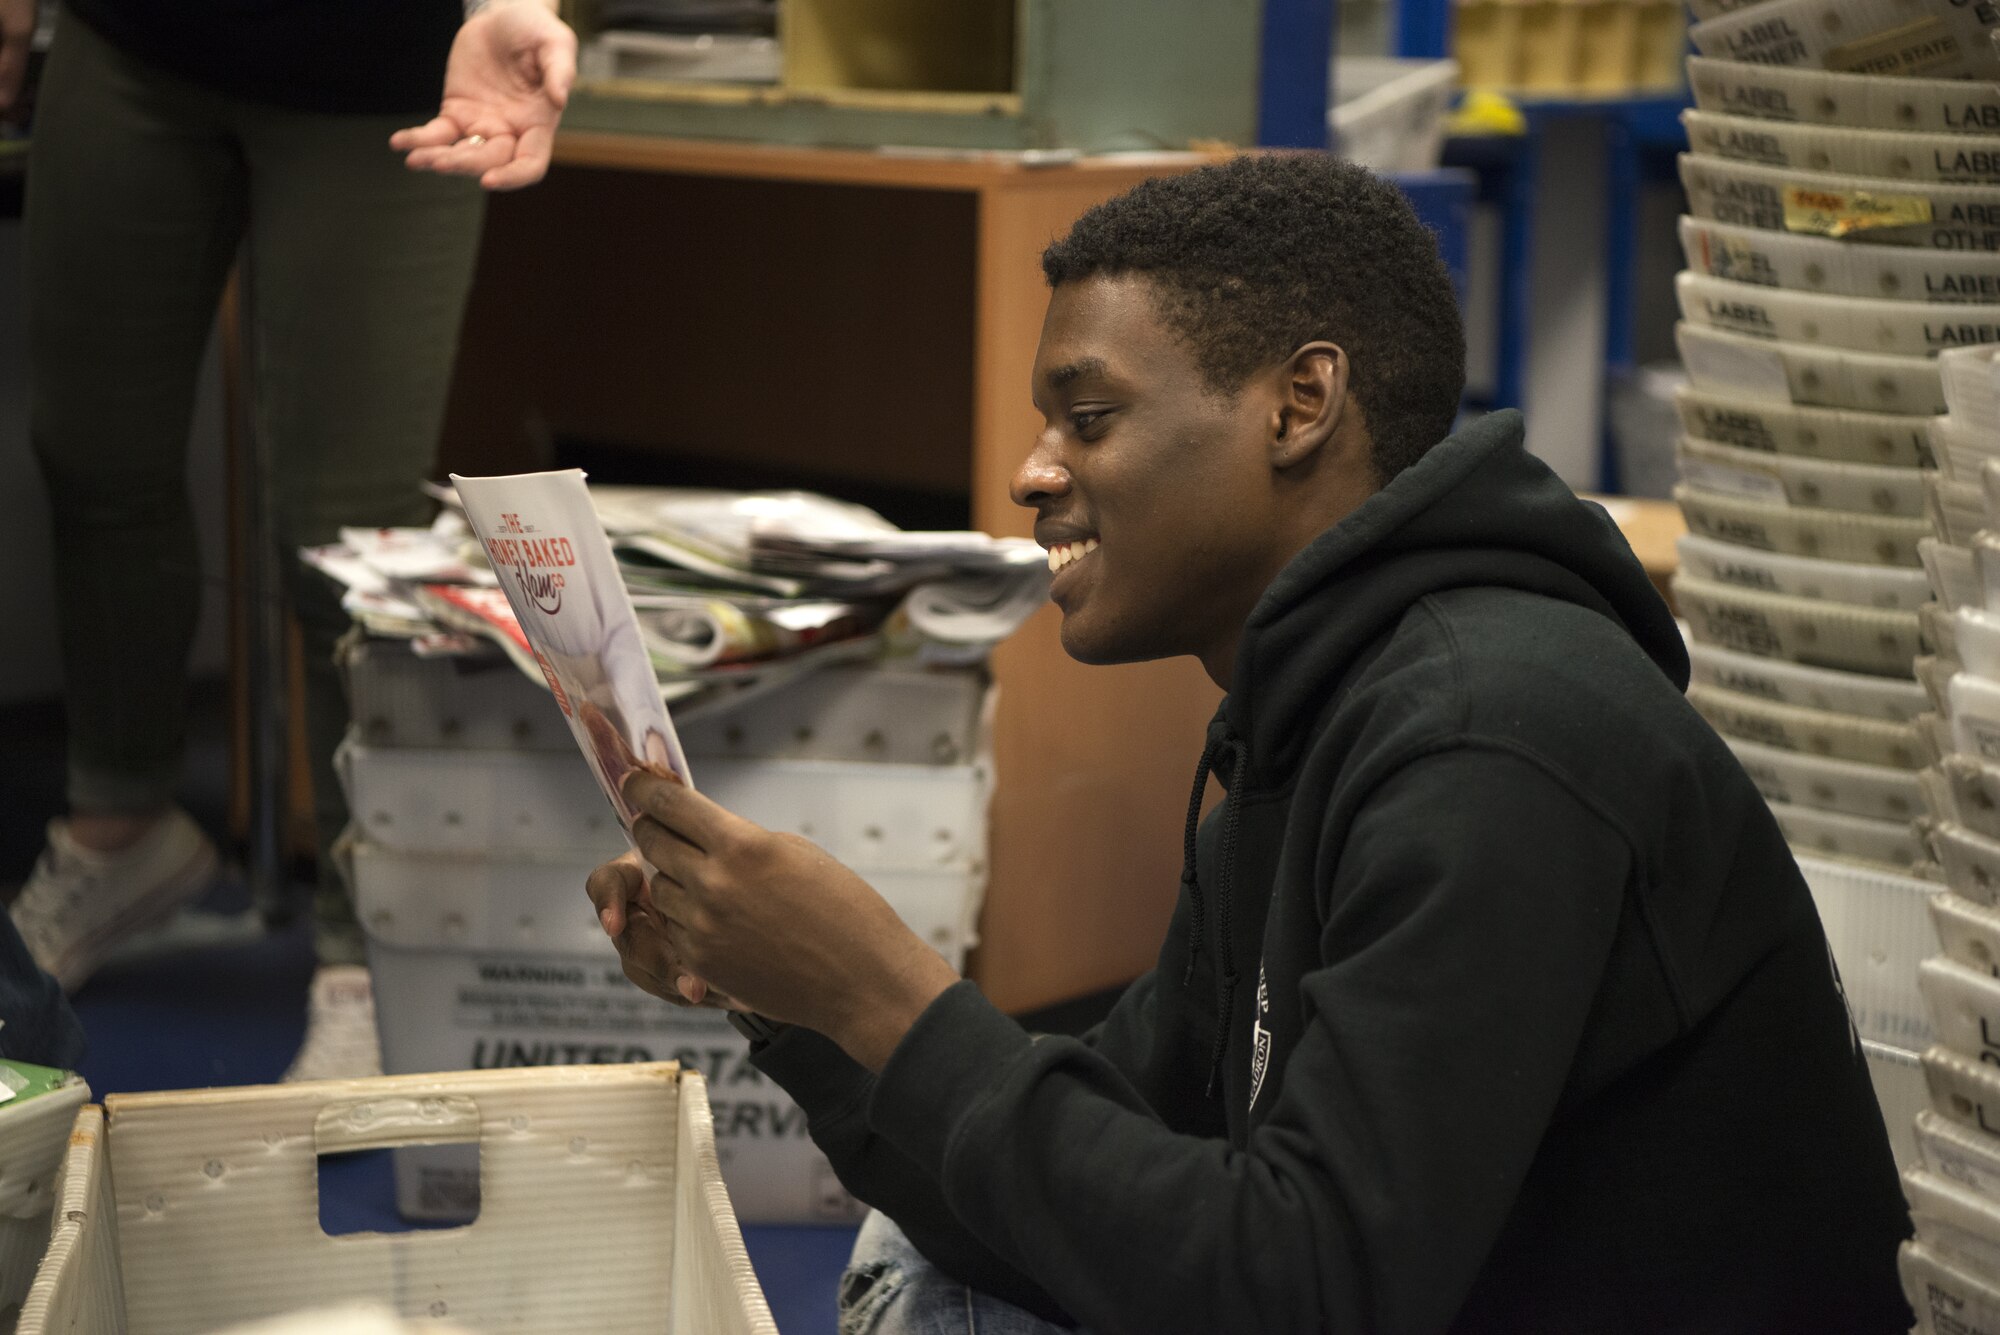 U.S. Air Force Airman 1st Class Exzavier Stevenson, a member of the 450th Intelligence Squadron, sorts mail at the North Side Post Office on Ramstein Air Base, Germany, Dec. 7, 2018. The 450th IS War-Bird Service Day imparts the importance of volunteerism to its Airmen. (U.S. Air Force Photo by Airman 1st Class Noah Coger)